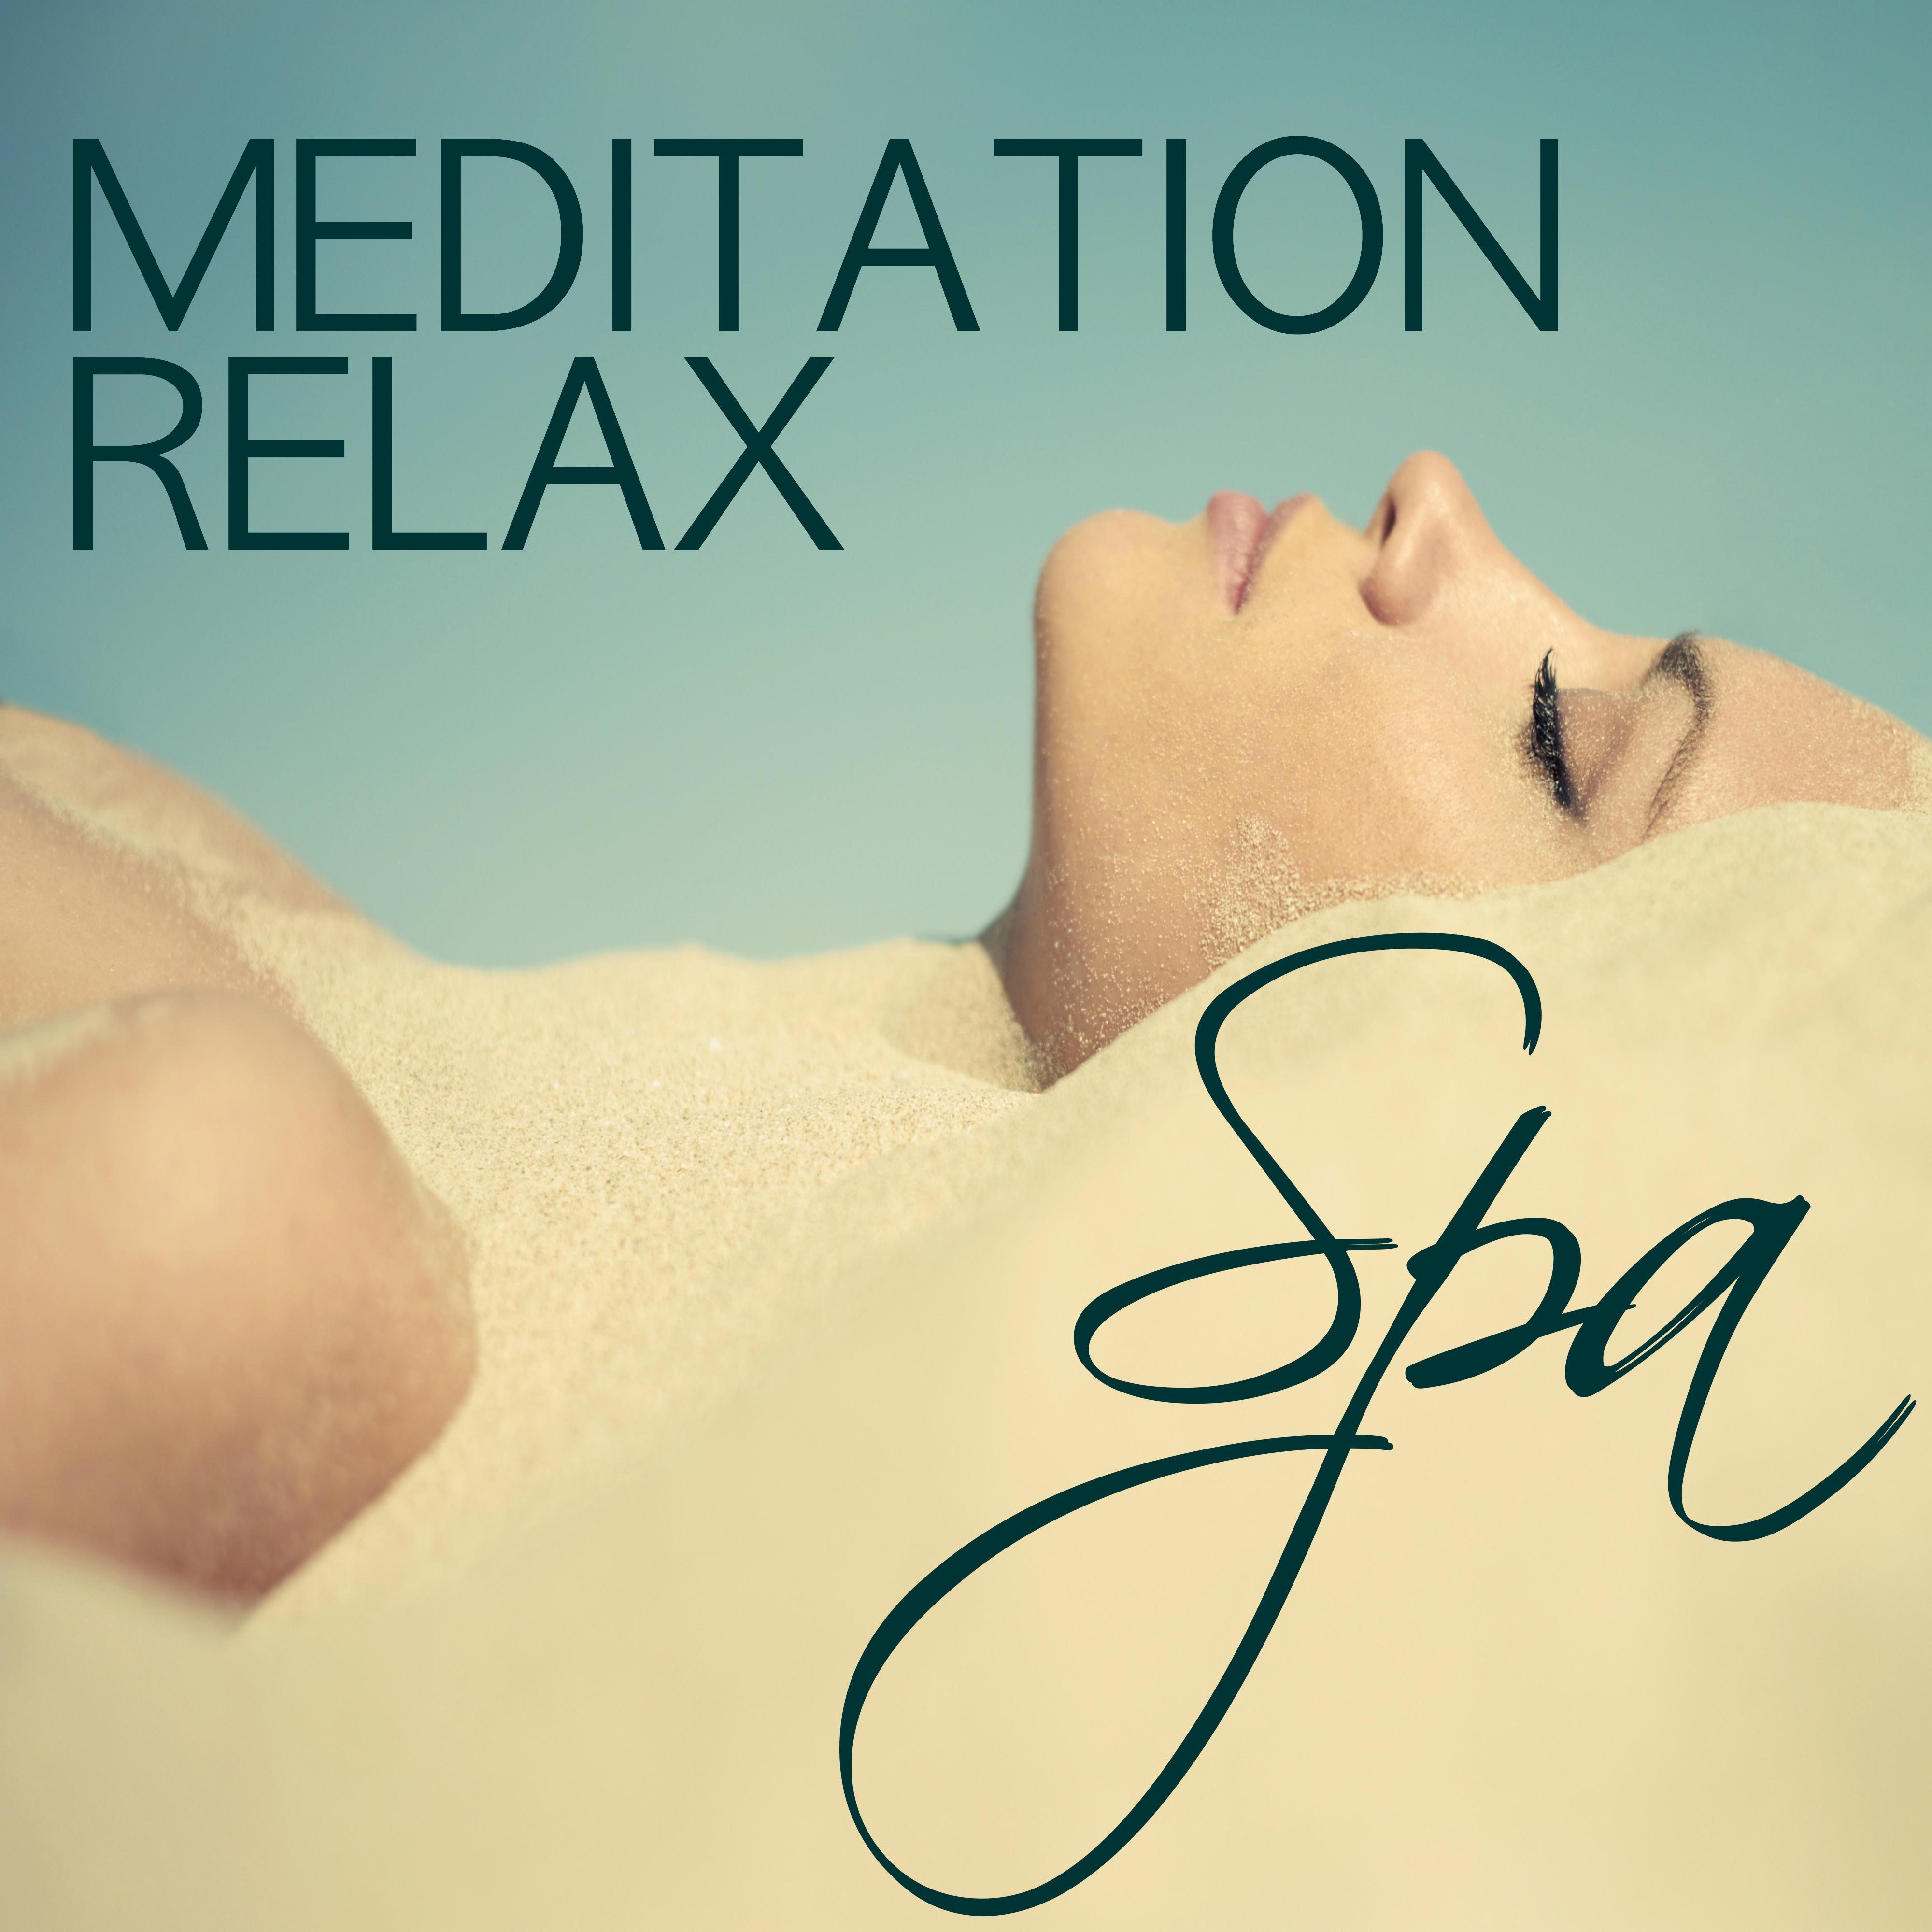 Meditation Relax Spa - Water Sounds and Ocean Waves Soothing Healing Music for Massage, Hot Stone, Thai, Yoga, Meditation & Sauna, Spa Music Relaxation Collection